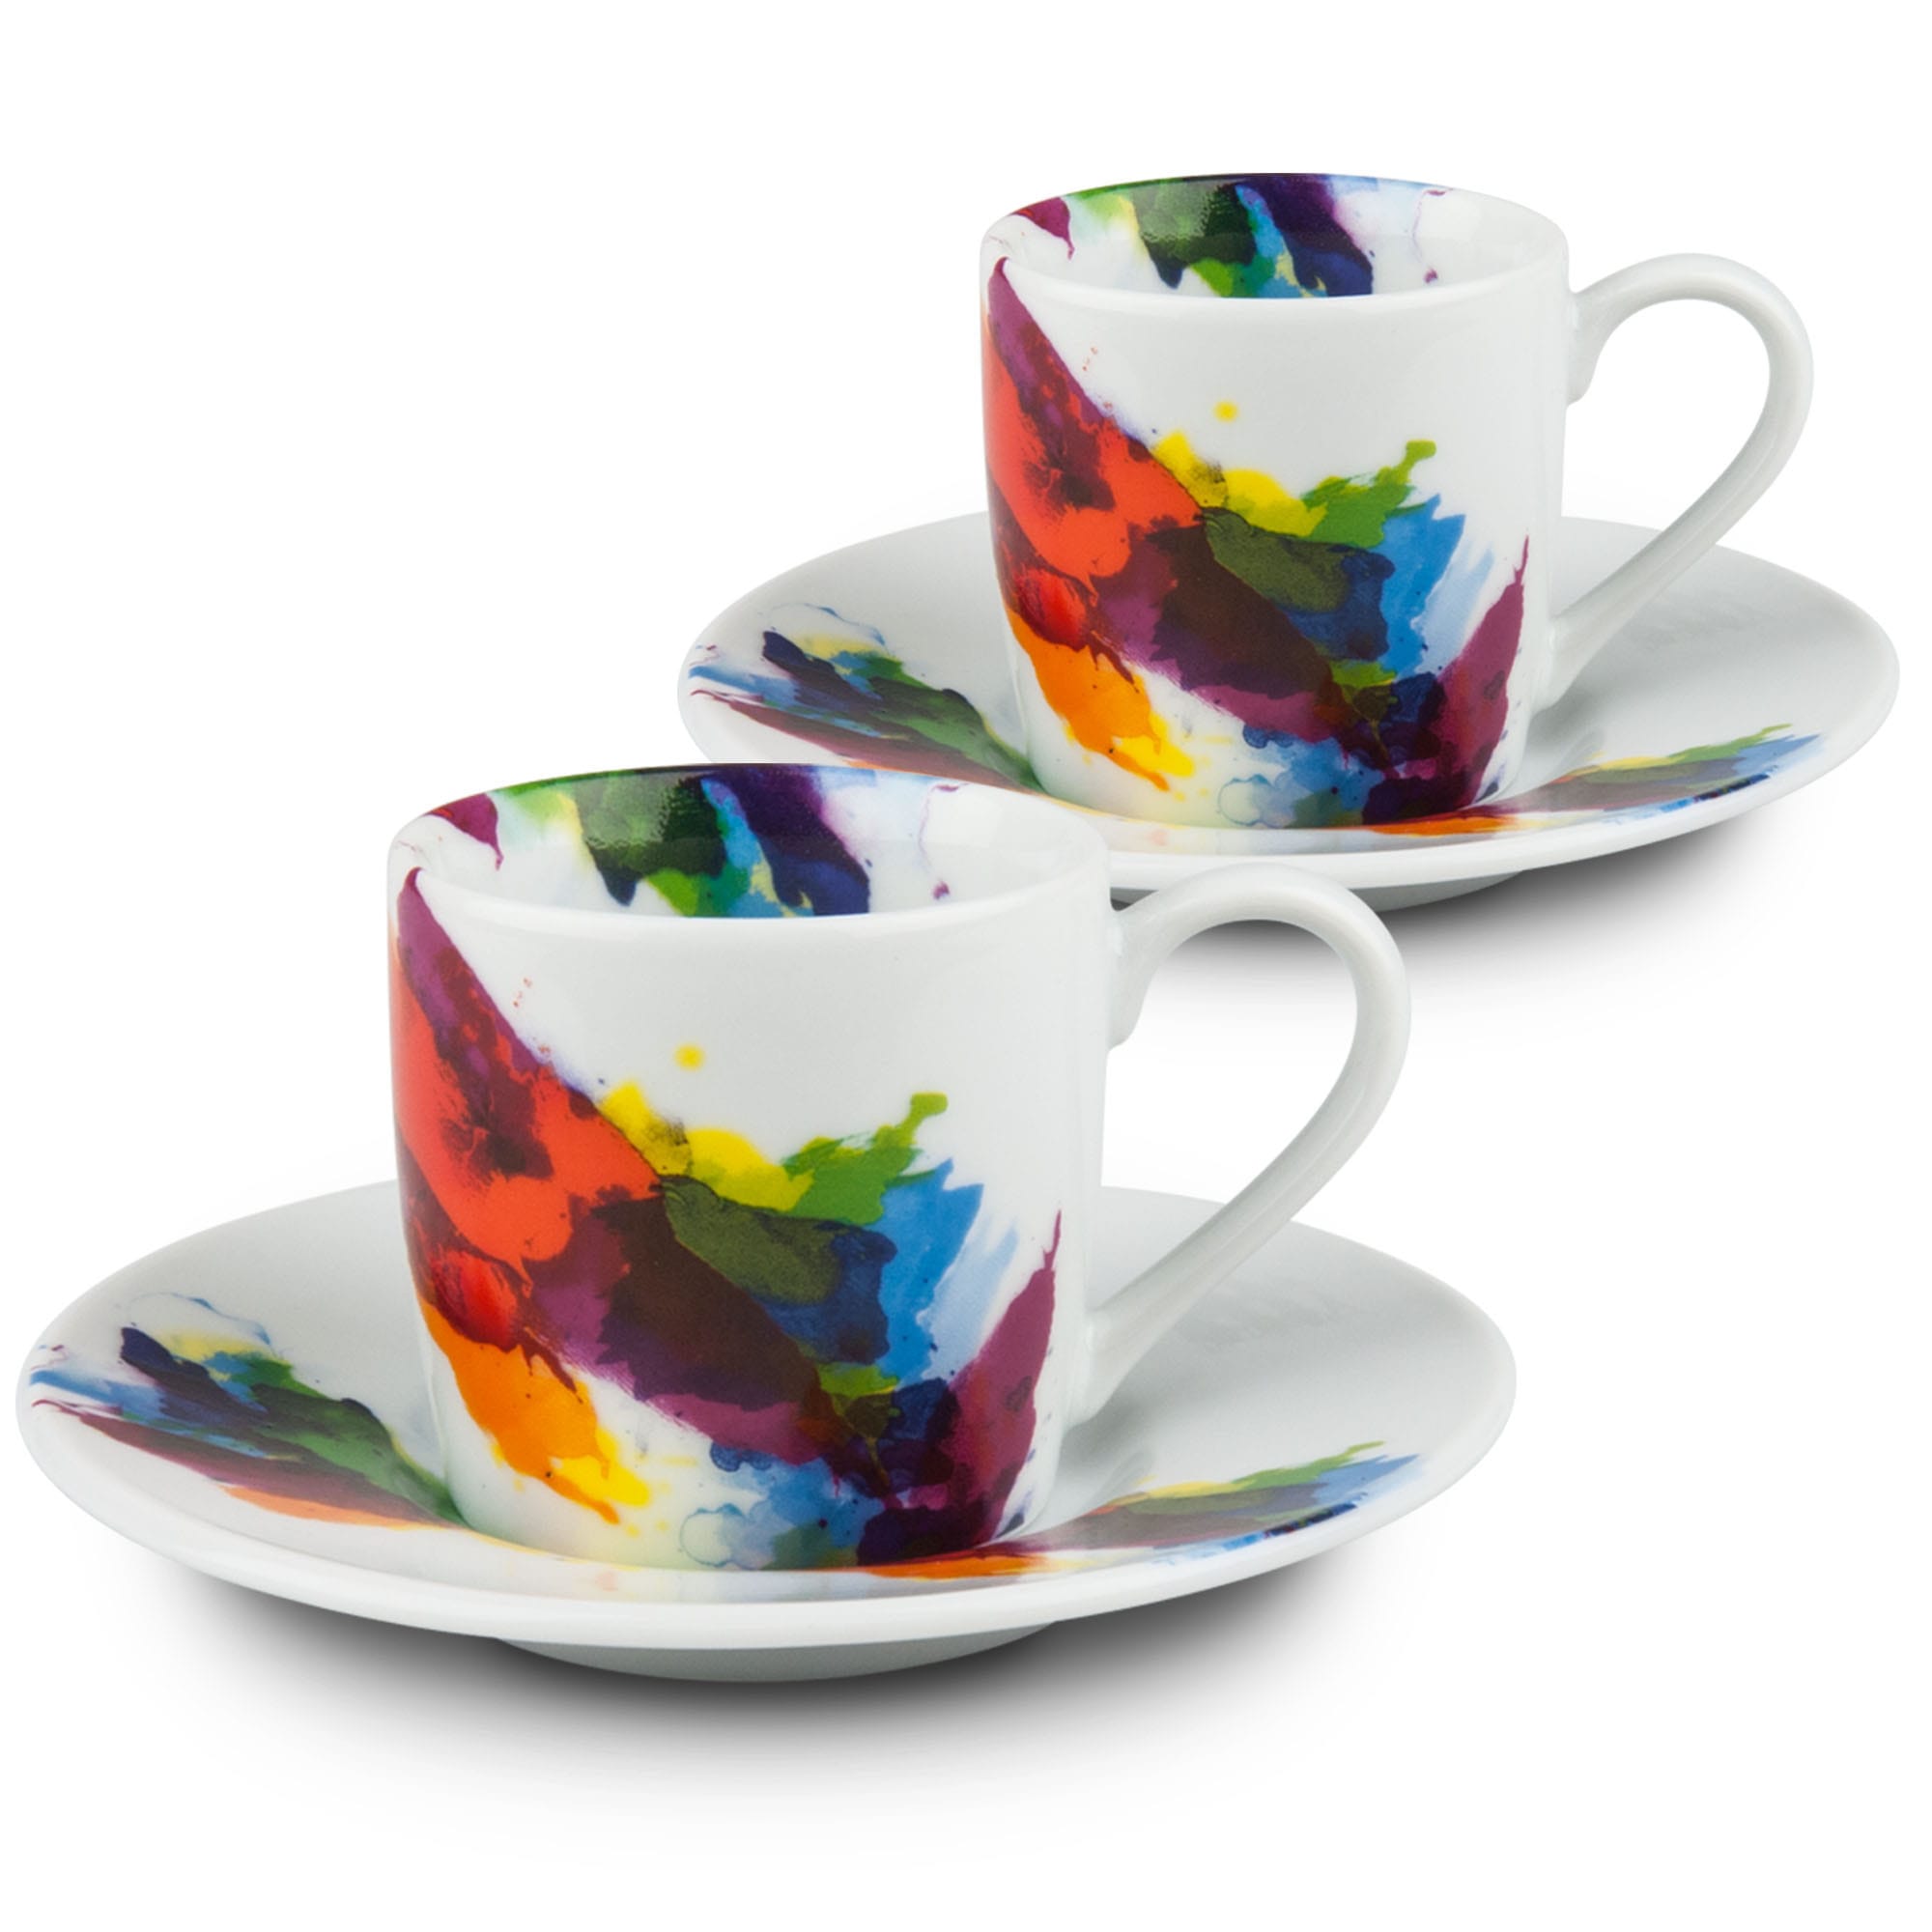 Konitz Coffee Bar Espresso Cups and Saucers, 2-Ounce, White, Set of 4